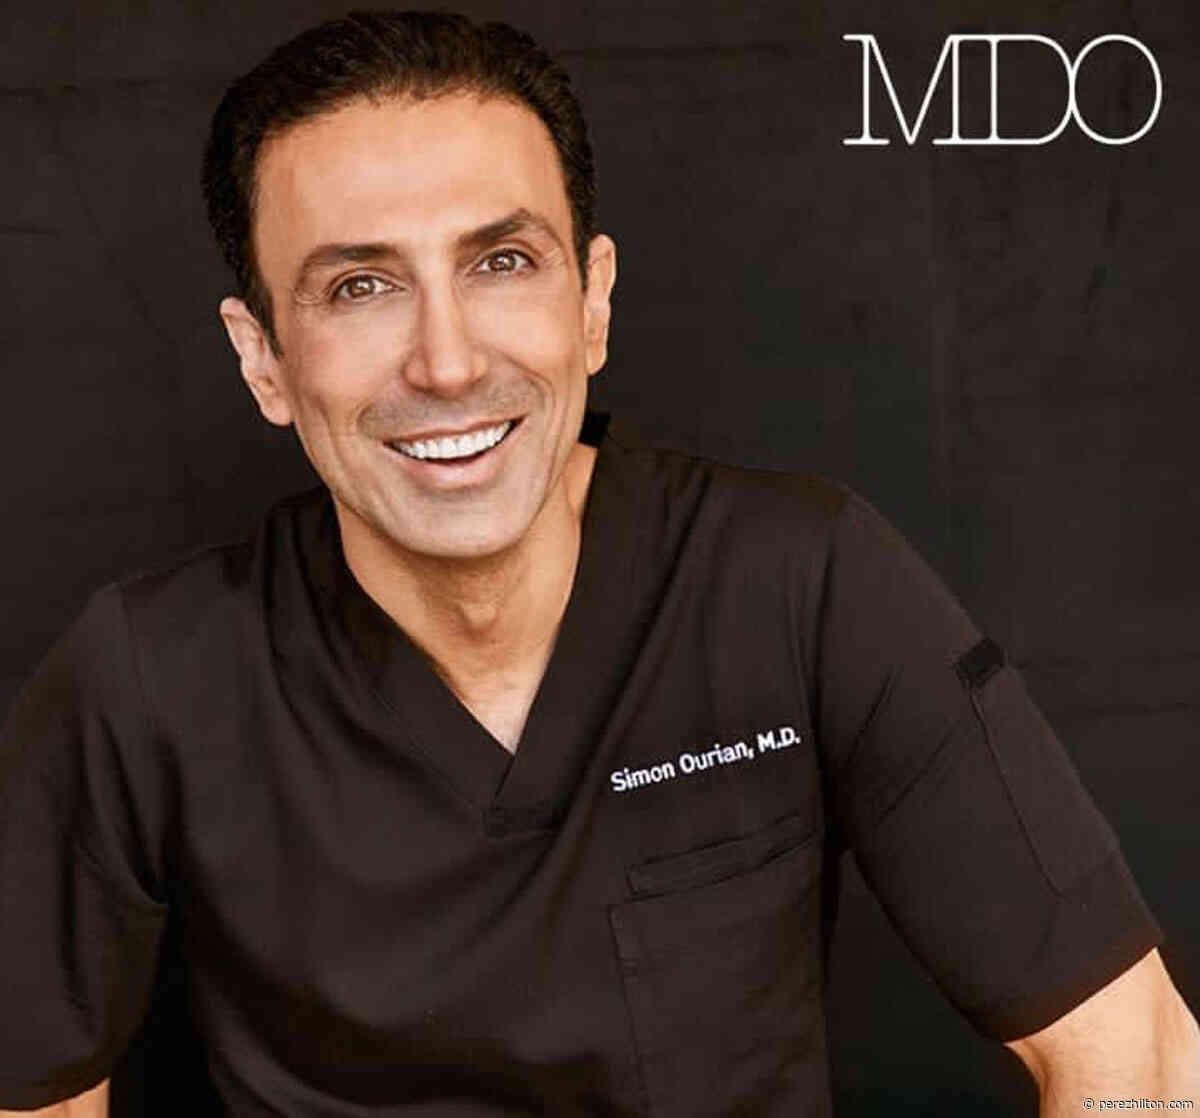 Meet The King Of Beauty: Celebrity Dermatologist Dr. Simon Ourian!